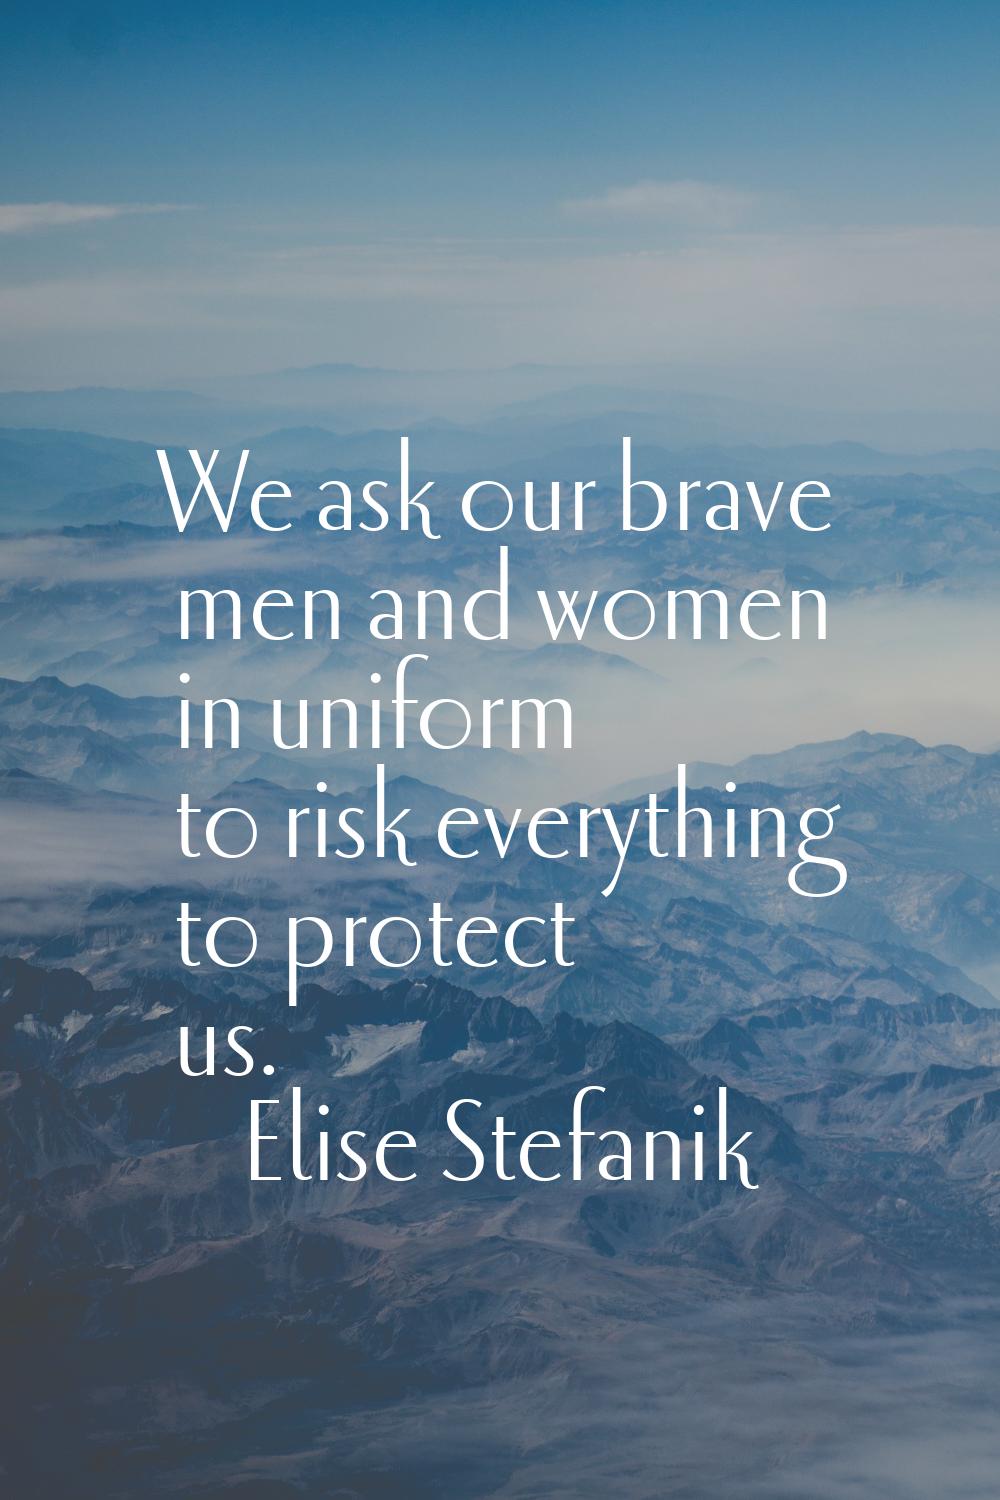 We ask our brave men and women in uniform to risk everything to protect us.